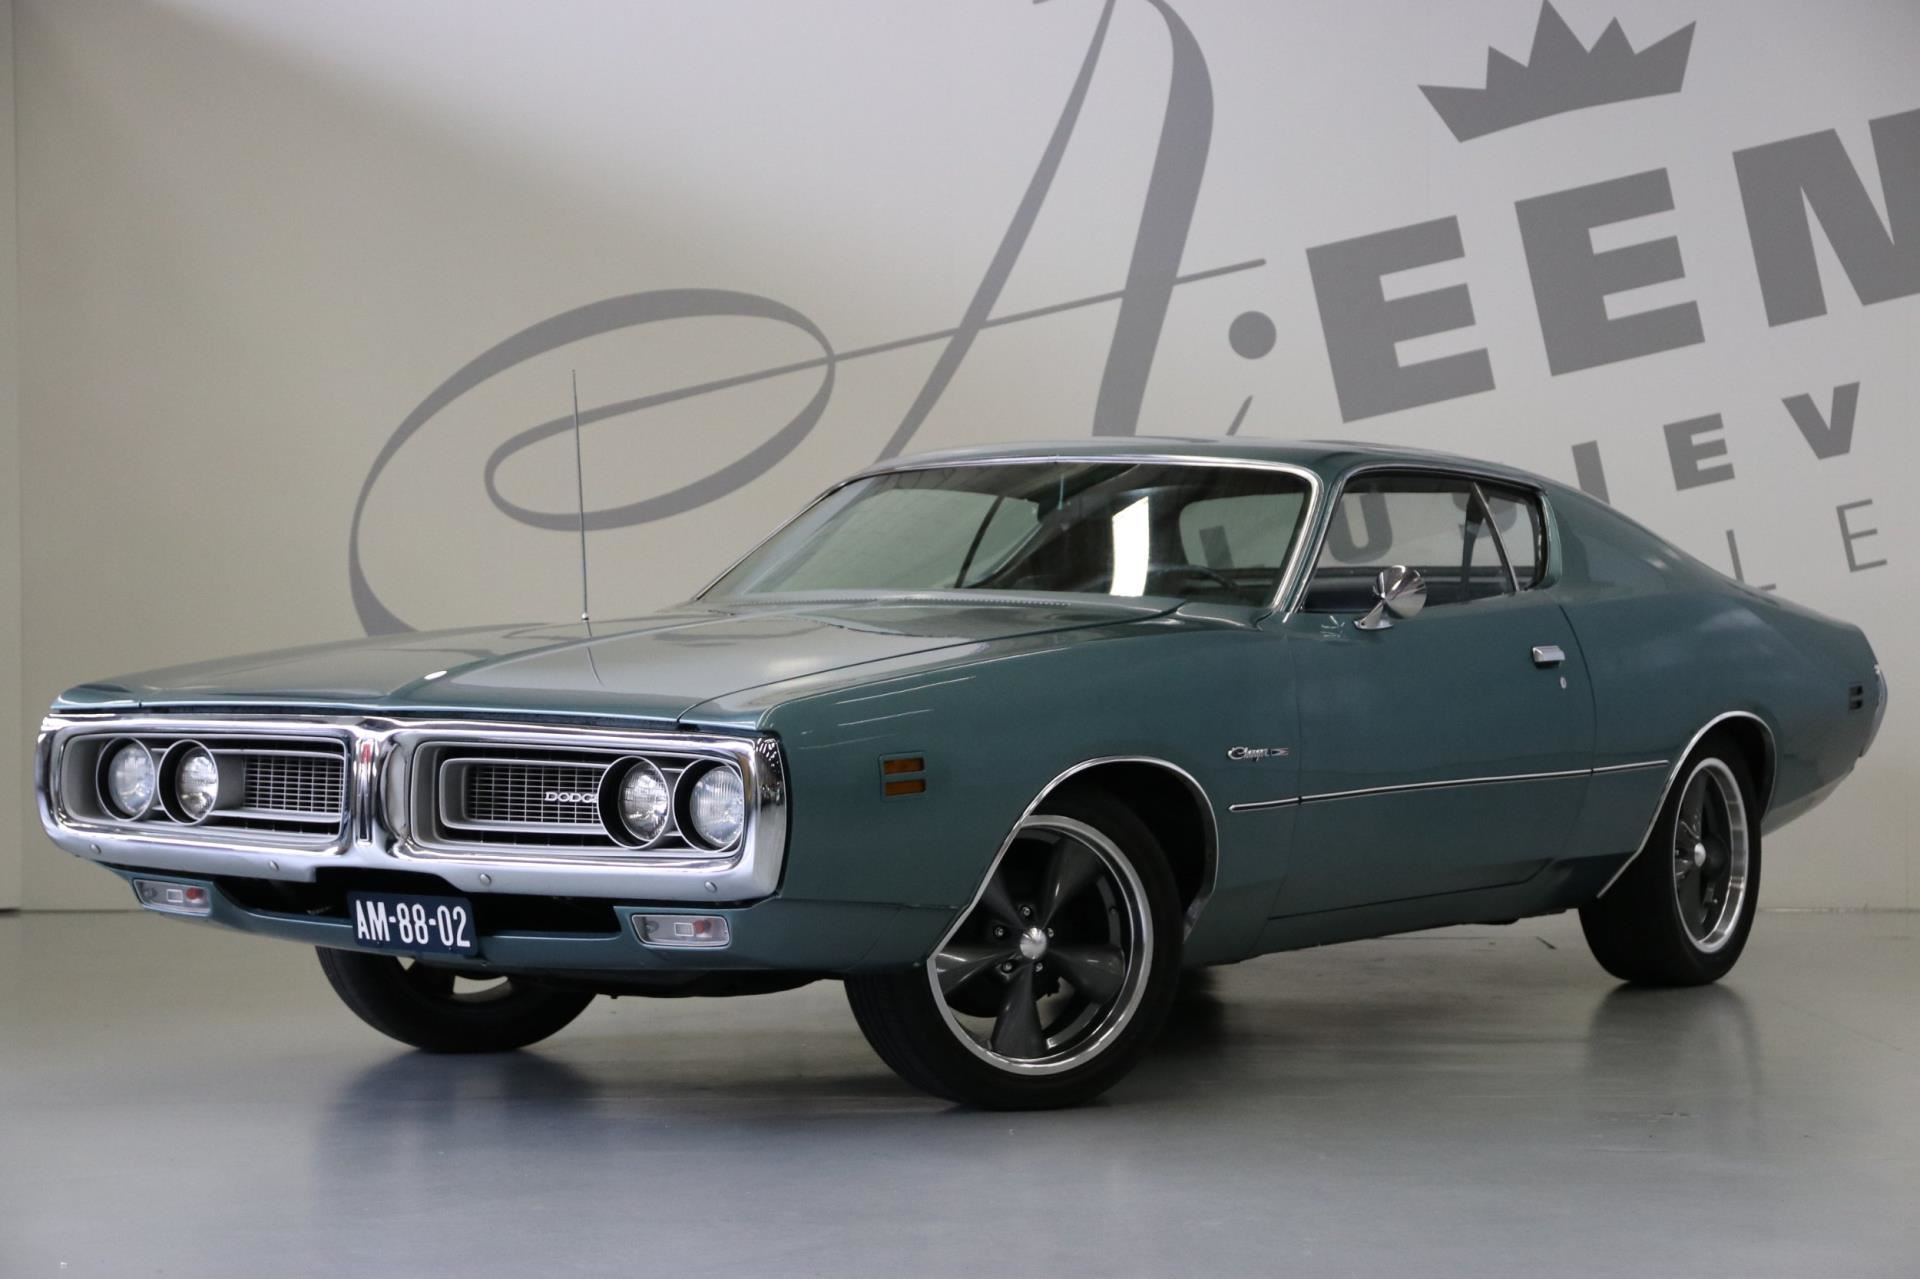 Dodge CHARGER occasion - Aeen Exclusieve Automobielen